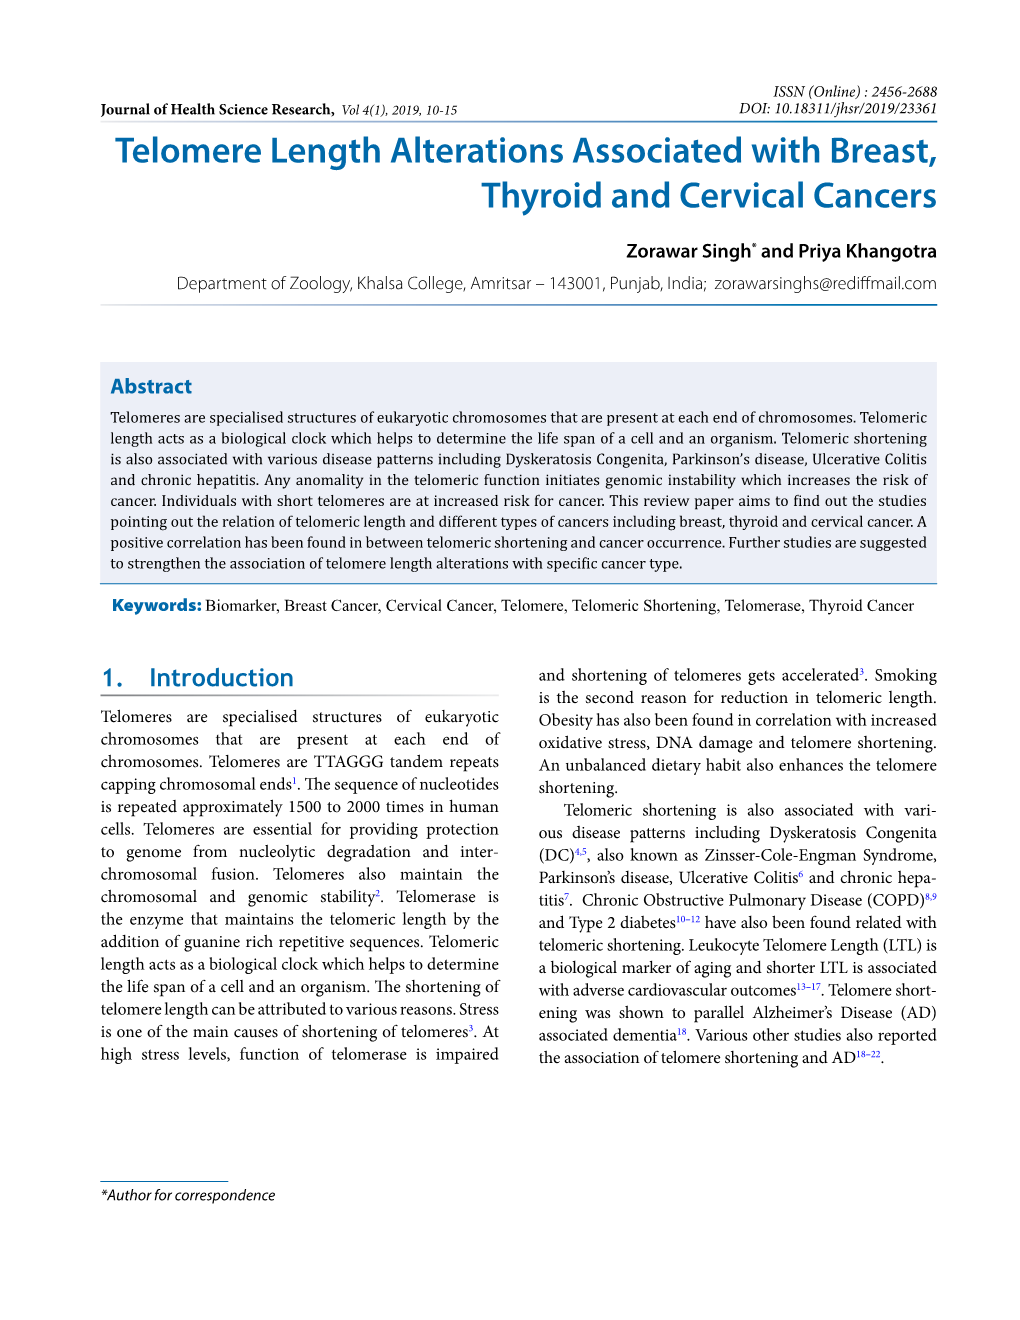 Telomere Length Alterations Associated with Breast, Thyroid and Cervical Cancers